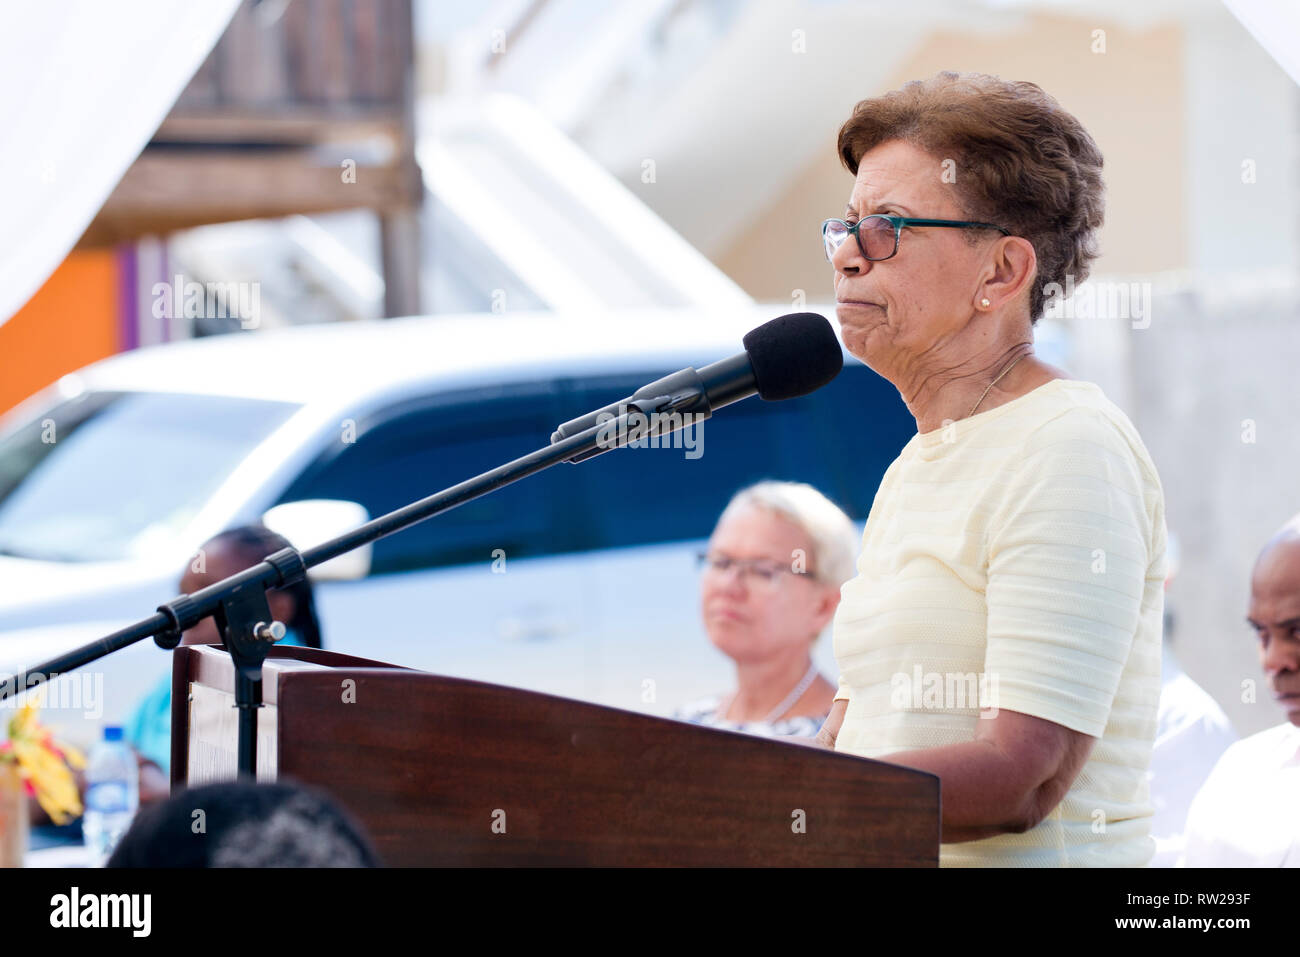 Hopkins Village, Stann Creek District, Belize. 4th Mar 2019. Ambassador Yvonne Hyde, Chief Executive Officer and NAO, Ministry of Economic Development and Petroleum, address the audience at the Inauguration of the Hopkins main road, a joint initiative with, The EU, Belize Government and Banana Accompanying Measures. Credit: Roi Brooks/Alamy Live News Stock Photo